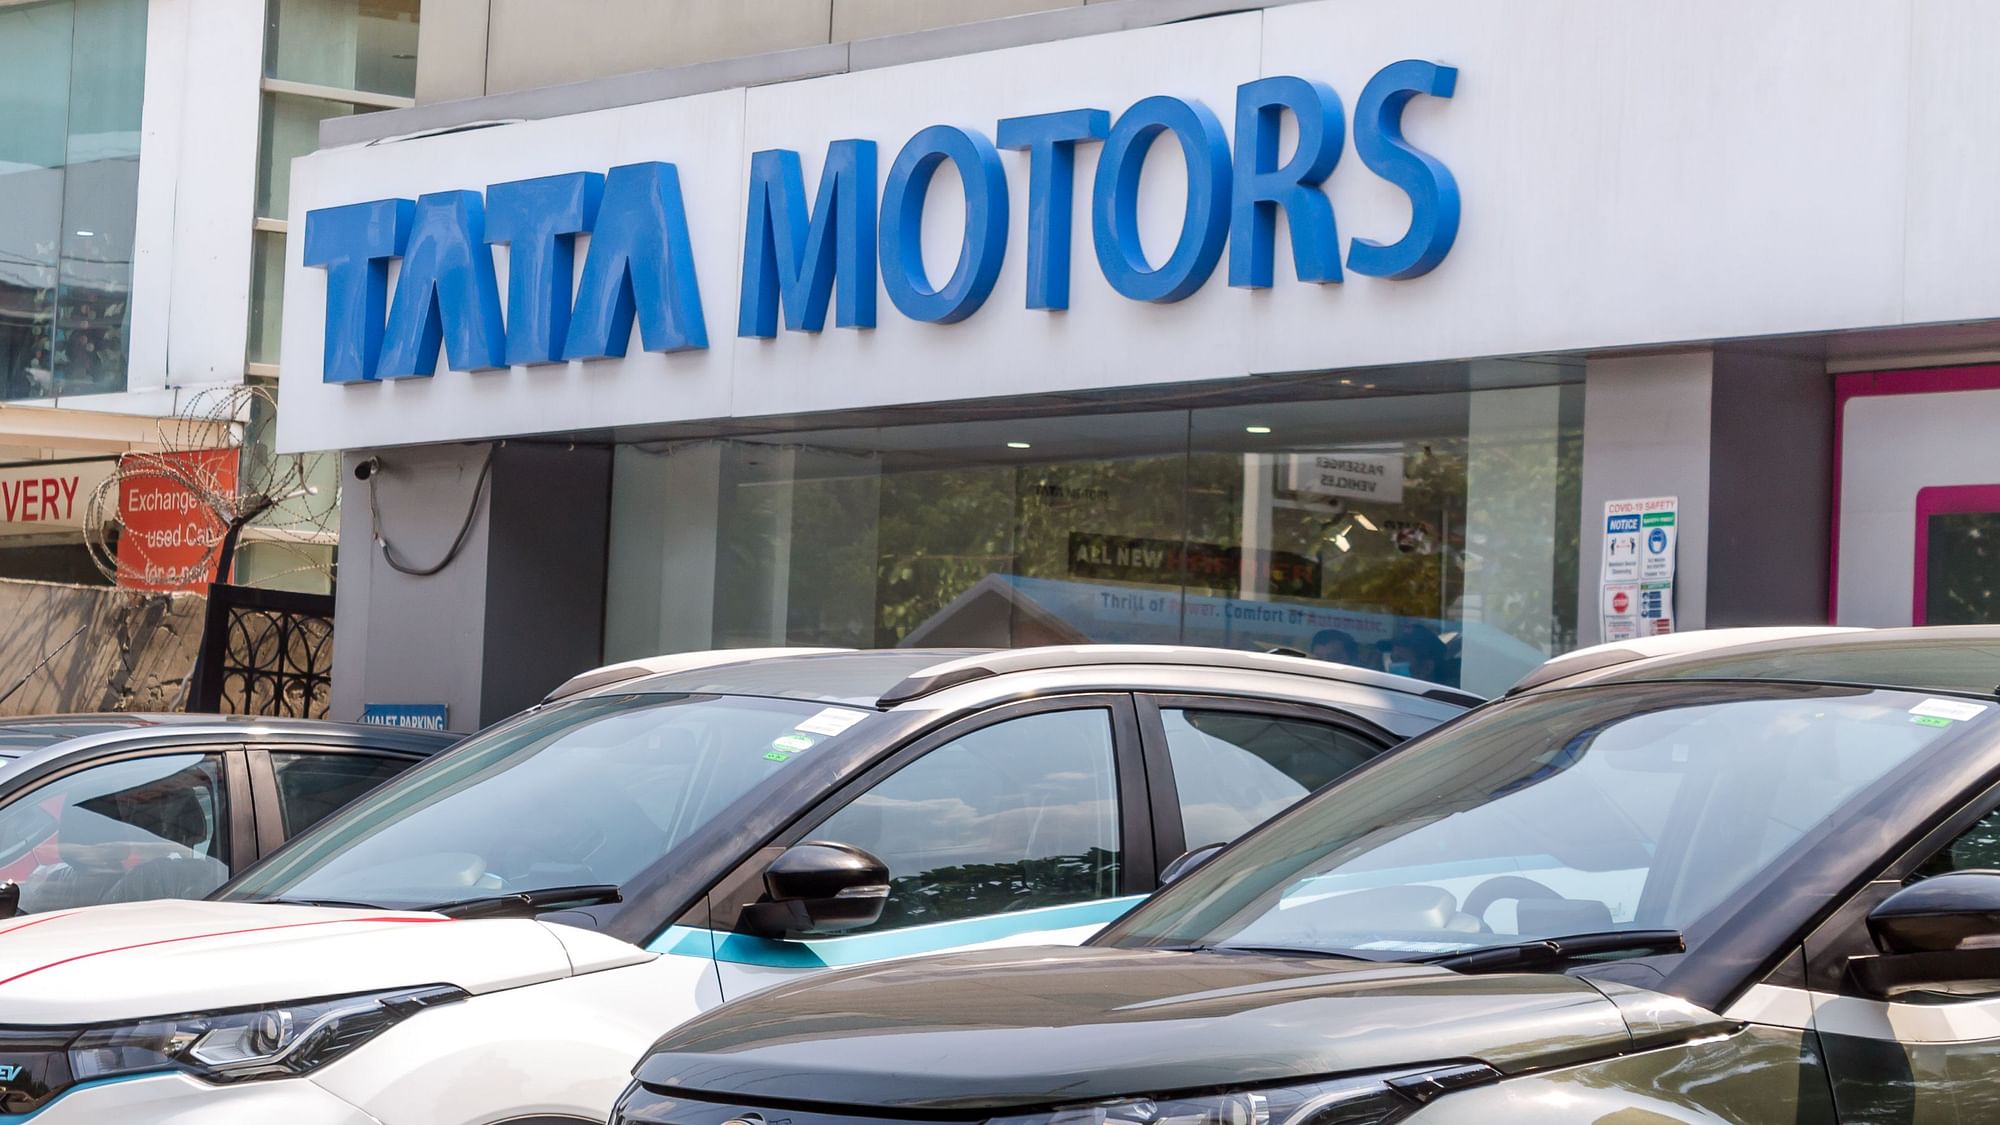 <div class="paragraphs"><p>TATA motors to raise the price of passenger vehicles from 1 May 2023. Here are the details.</p></div>